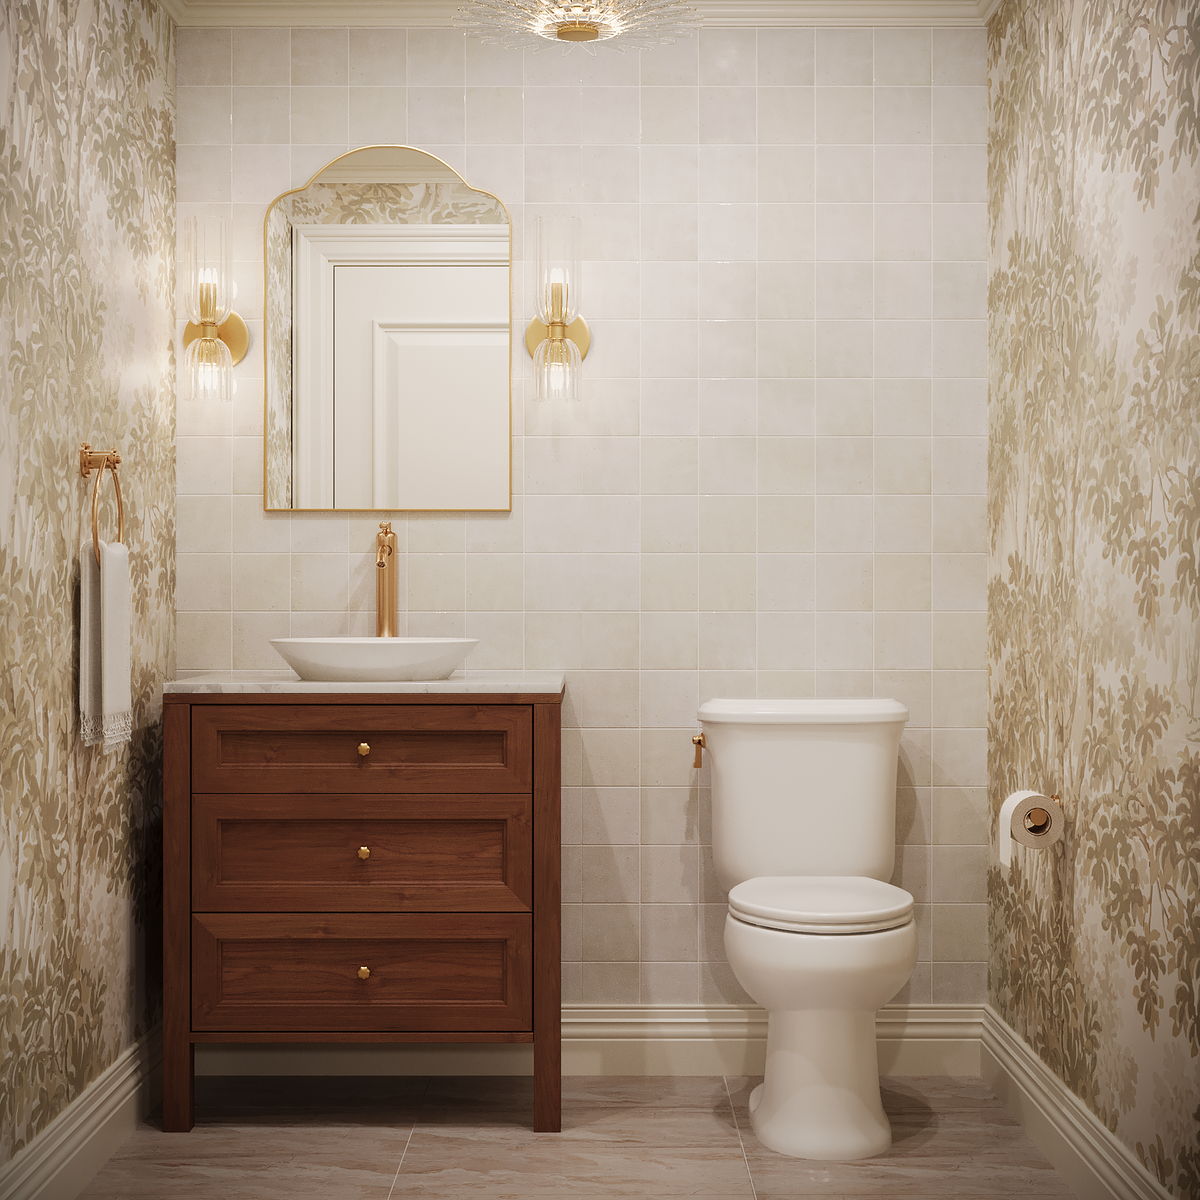 Ambler half bathroom collection wood vanity with neutral forest wallpaper and toilet